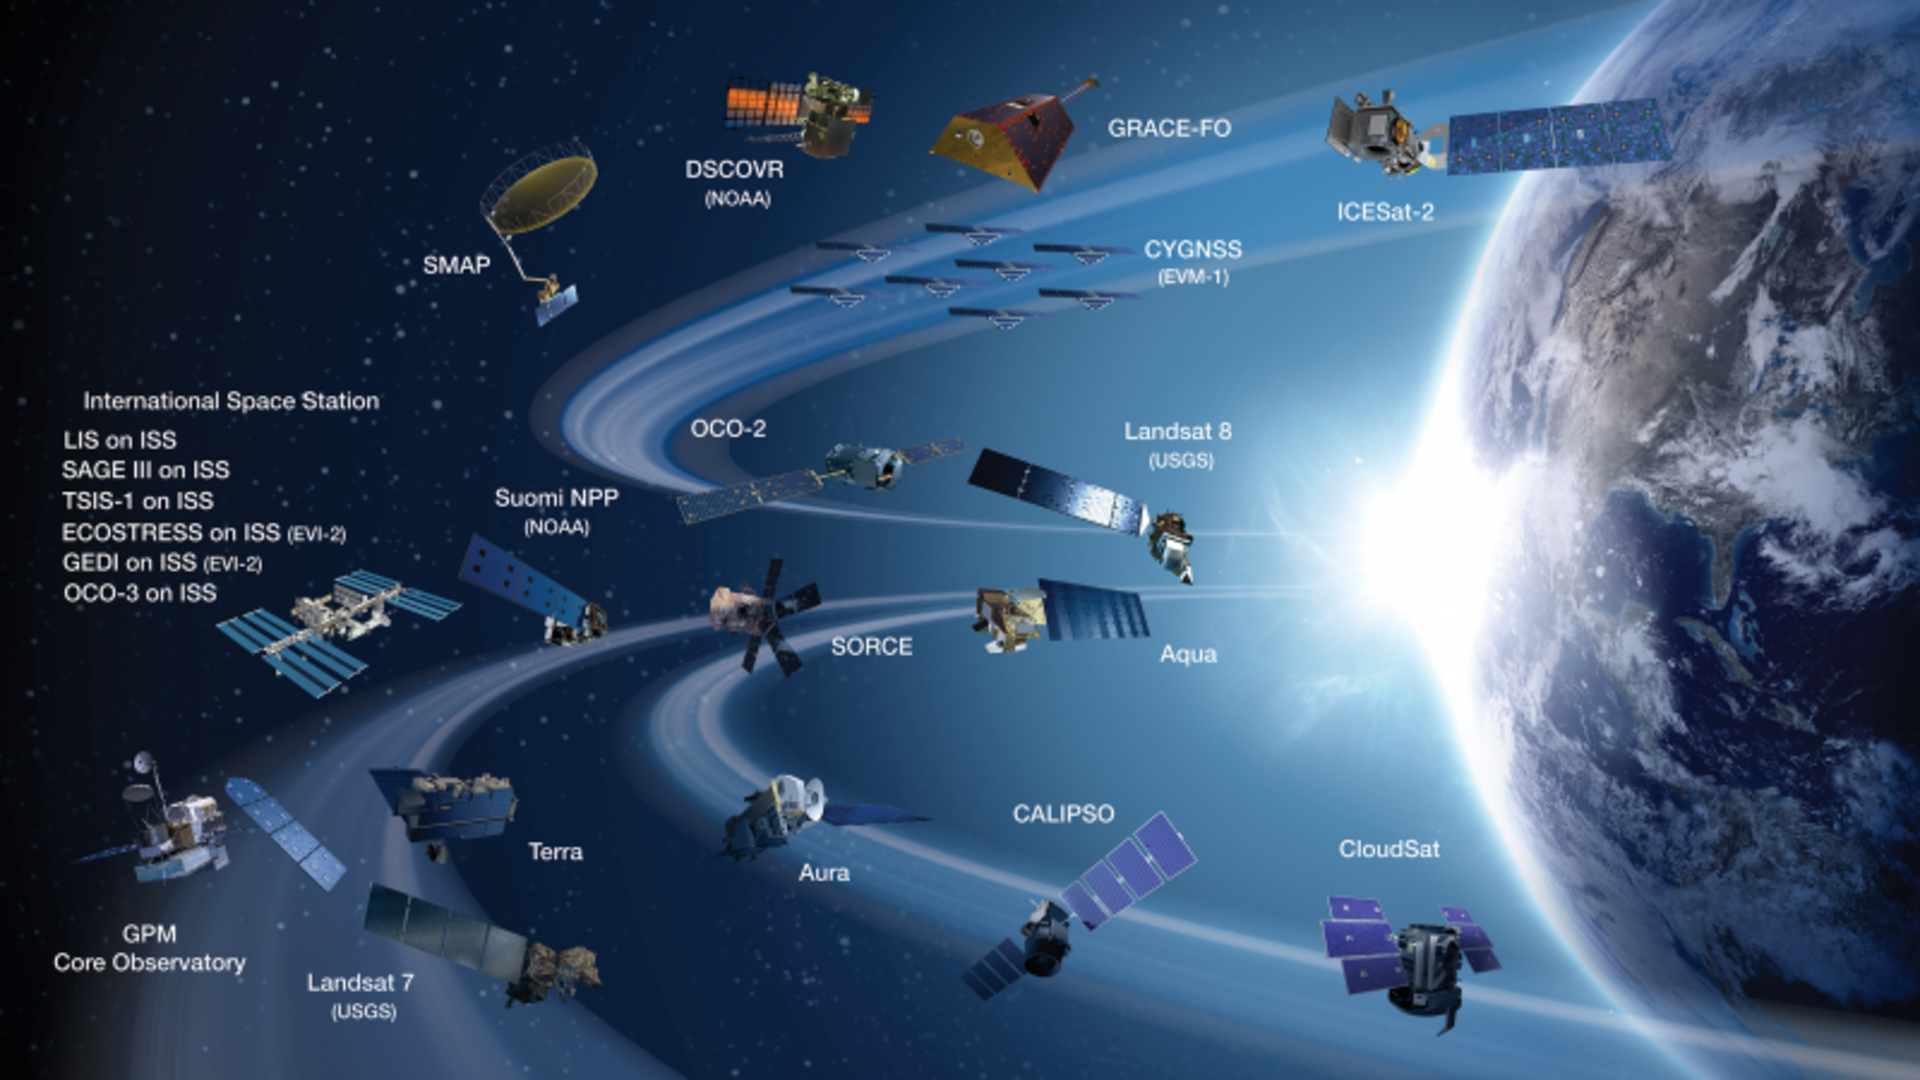 NASA’s suite of operational Earth science missions